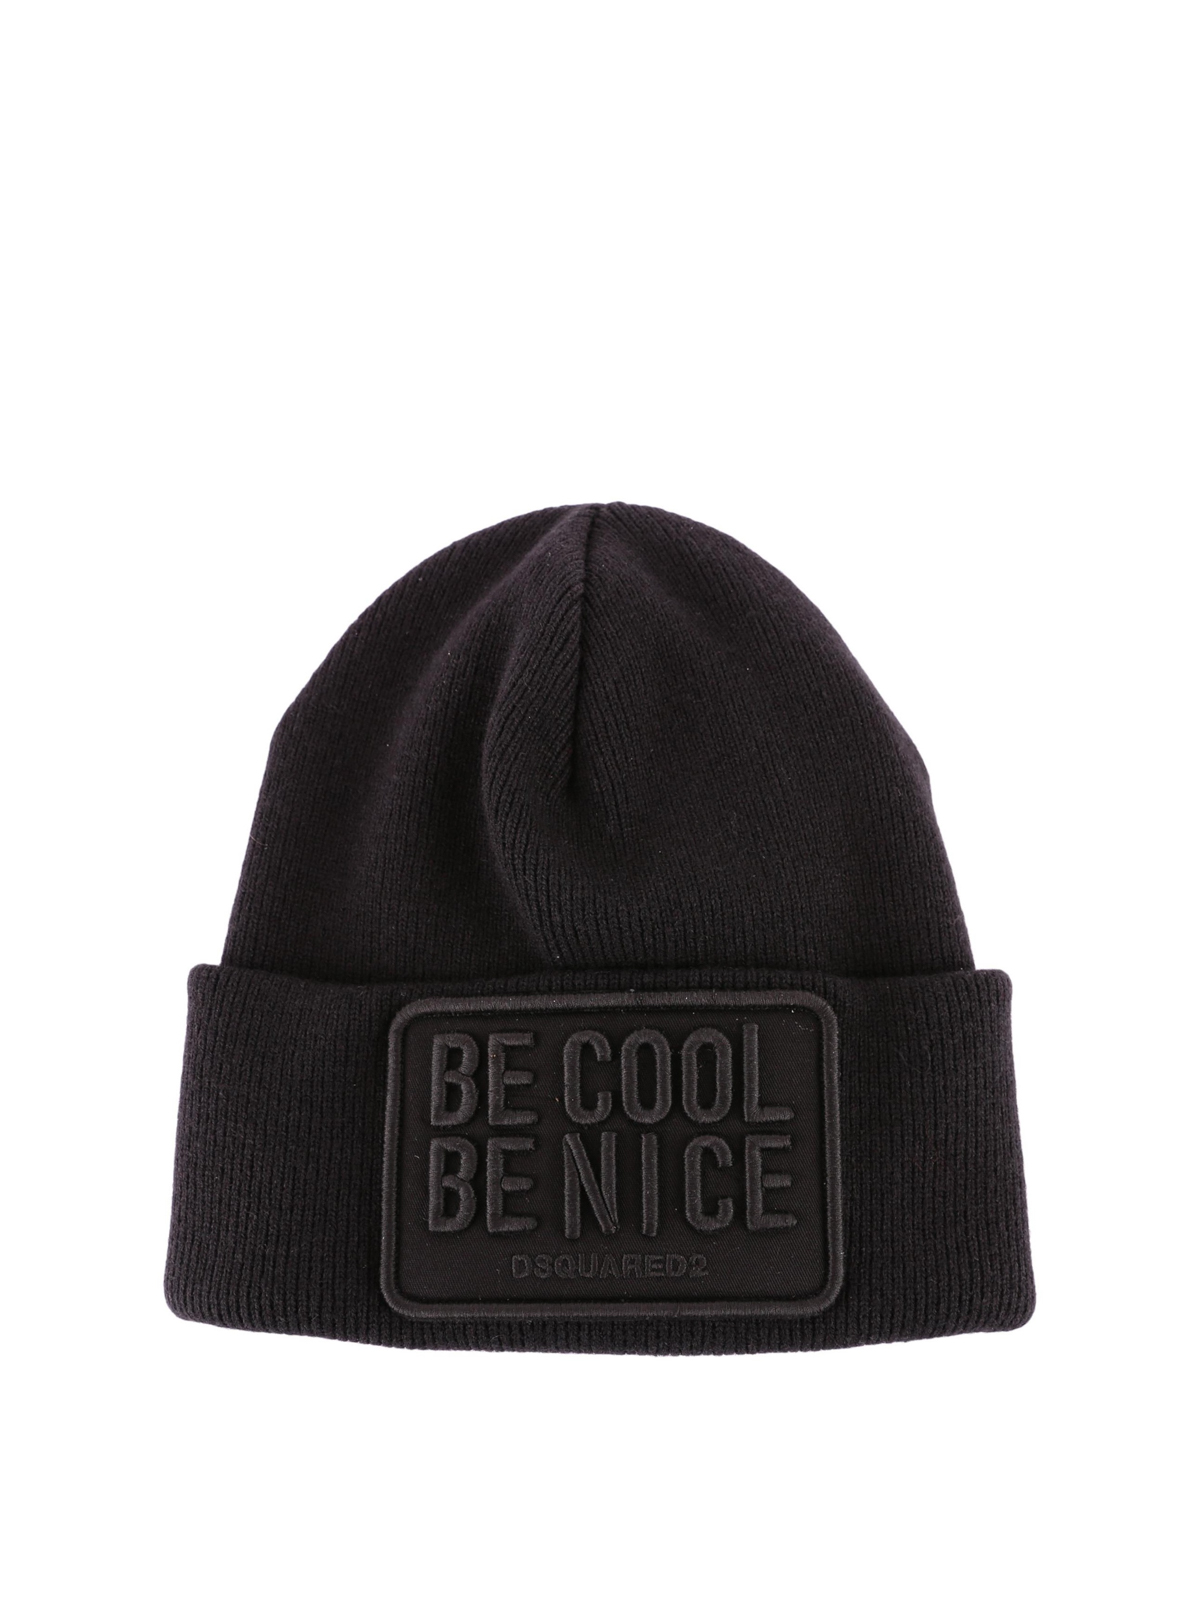 dsquared2 be cool be nice cap